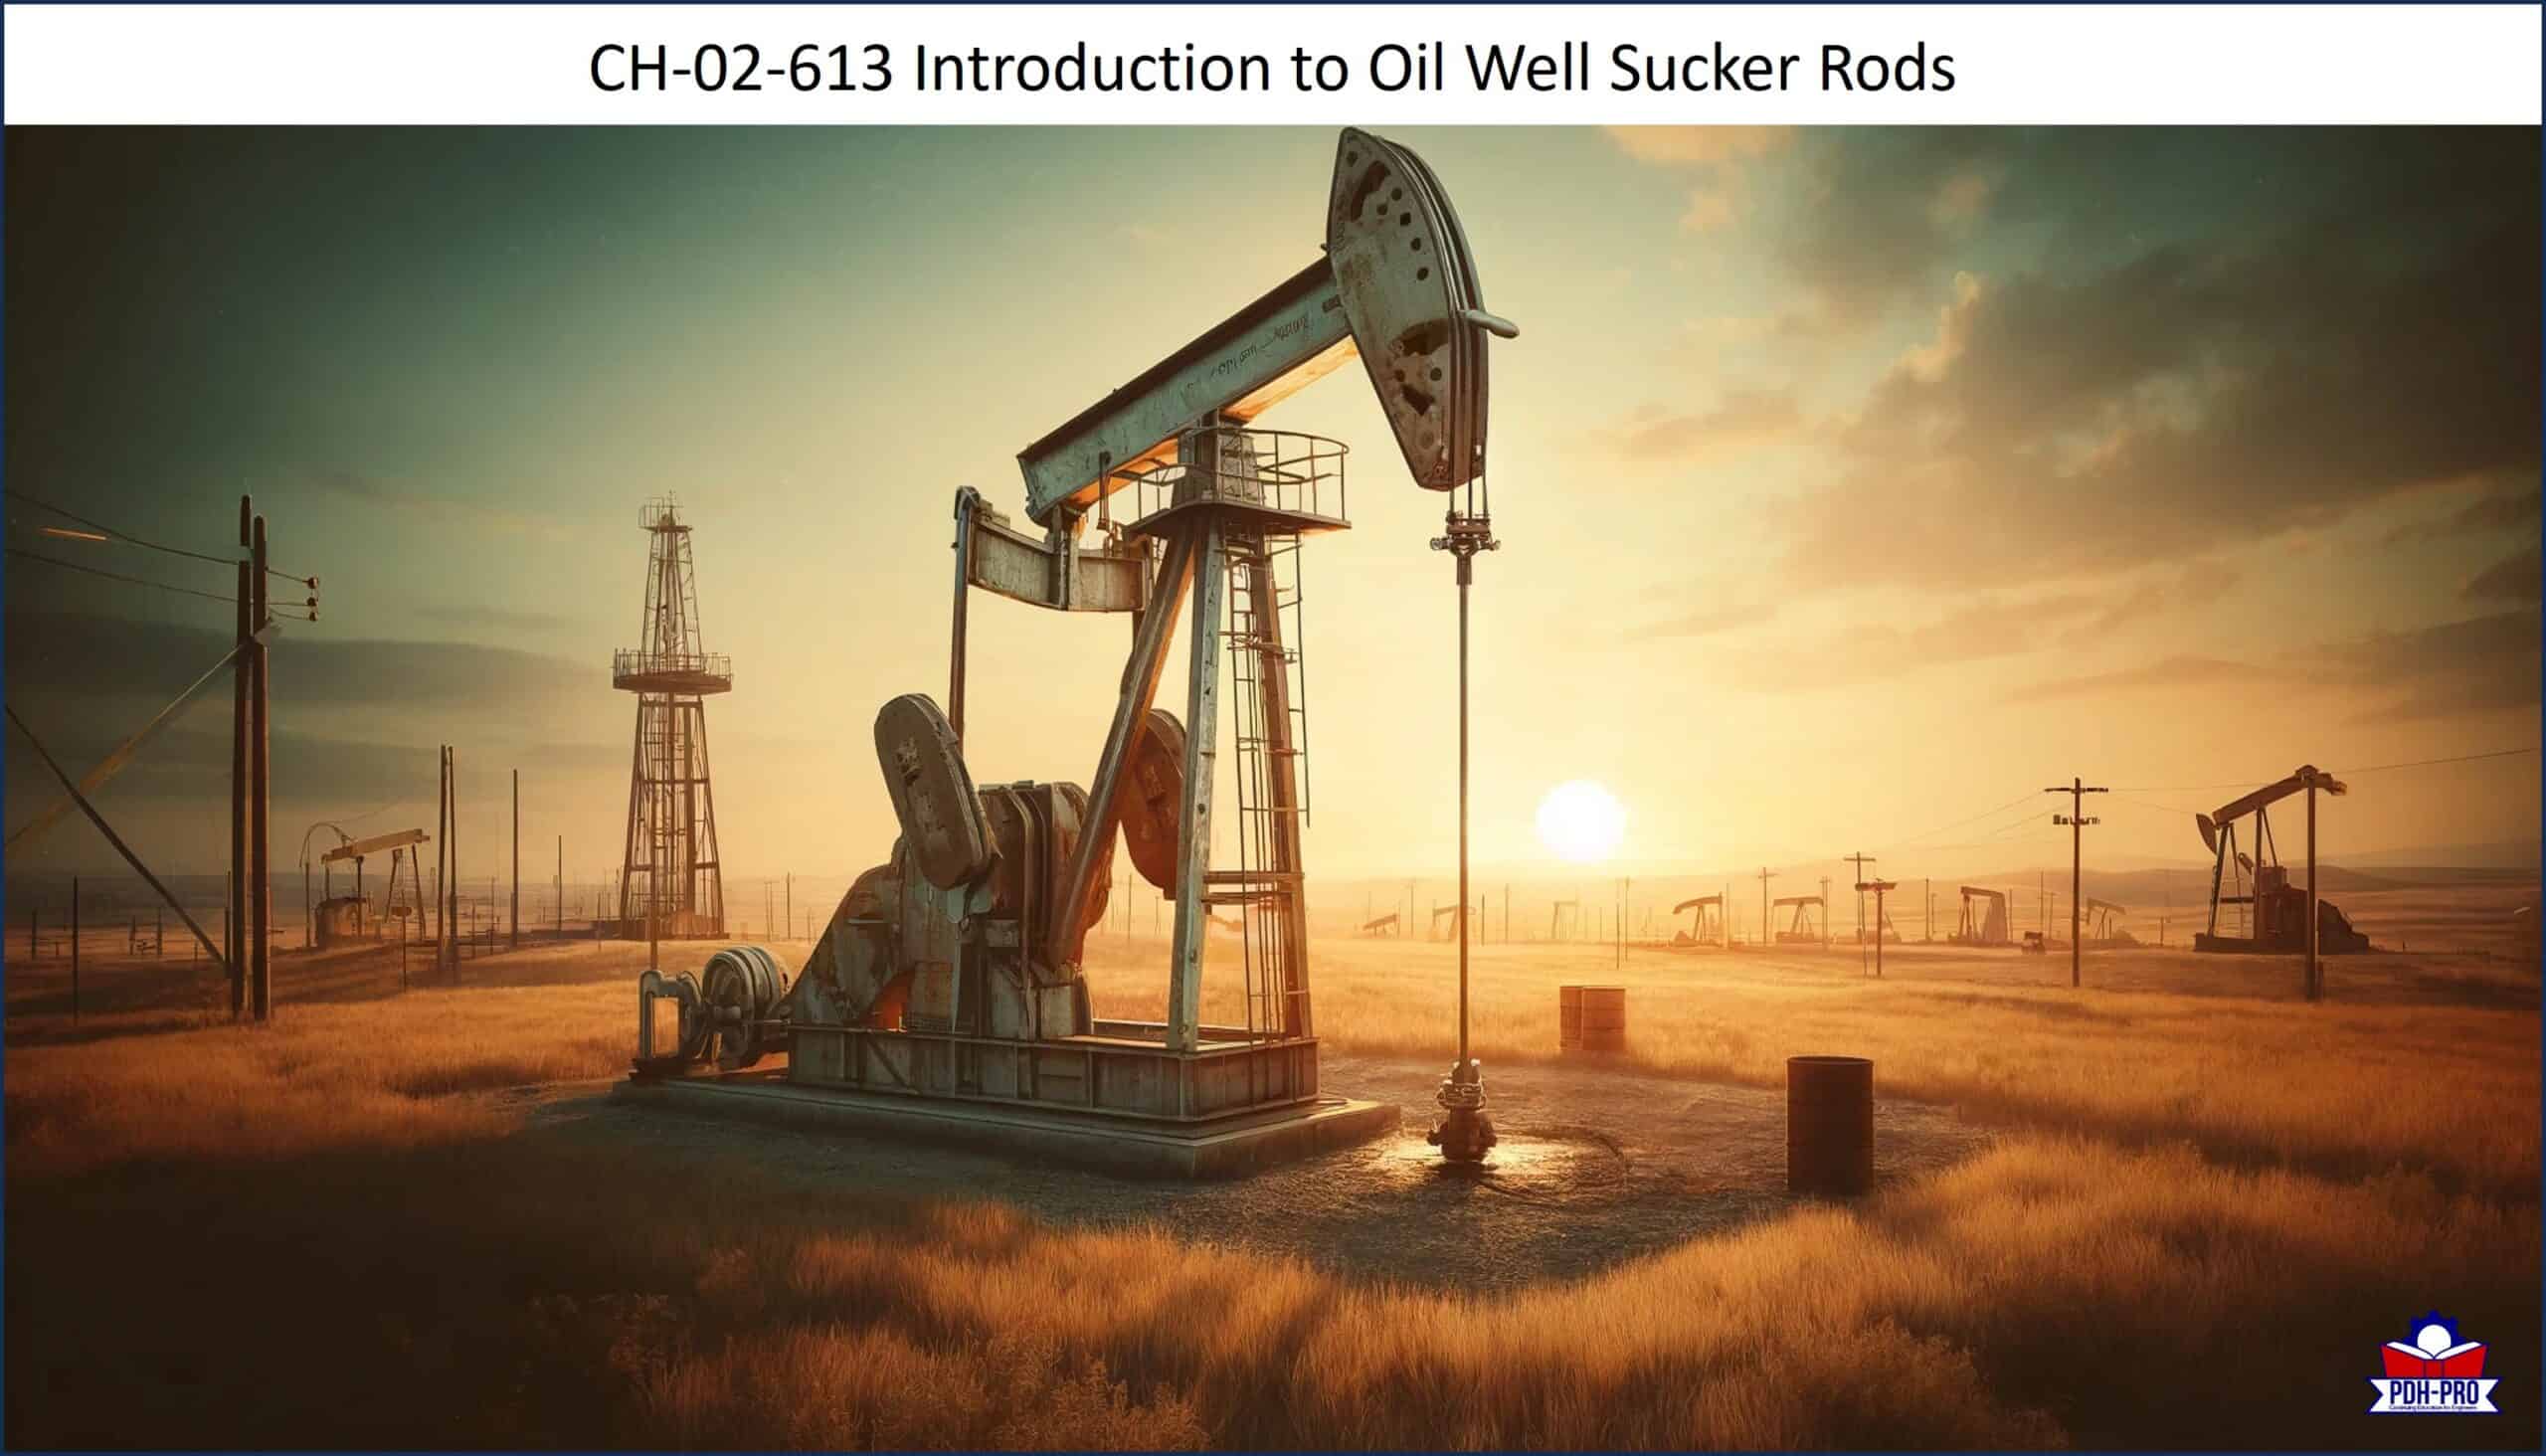 Introduction to Oil Well Sucker Rods